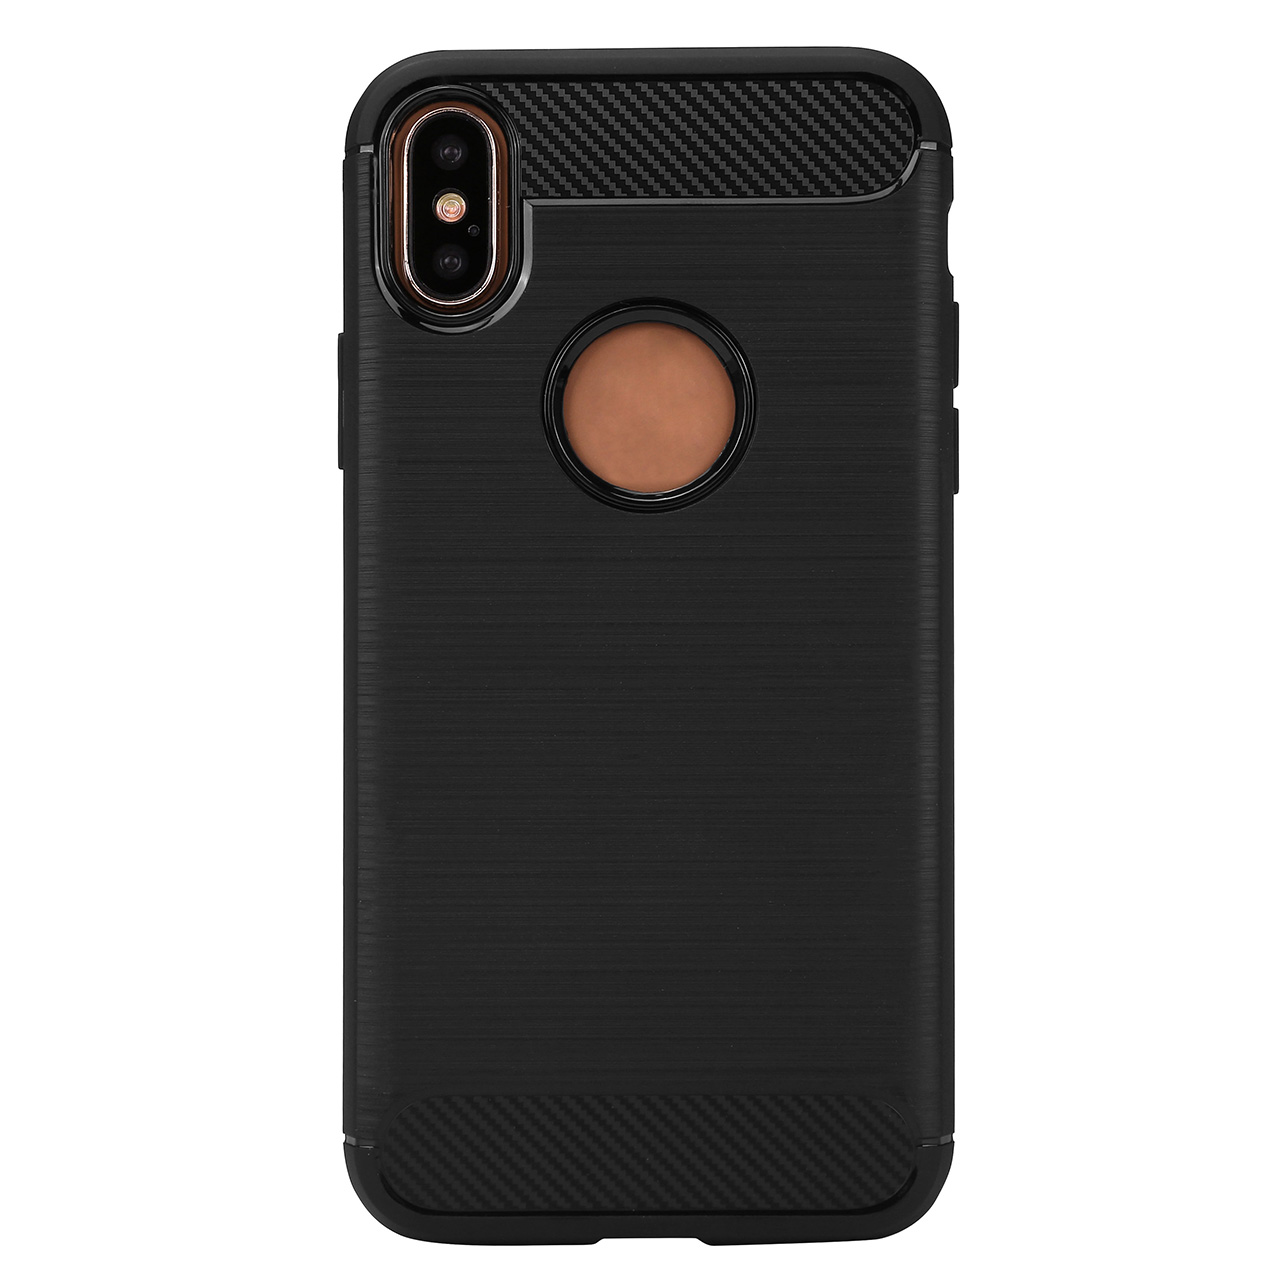 ACBungji iPhone X Case Cover Soft TPU Carbon Fiber Protective Cover Slim Fit for iPhone X / iPhone 10 (Black)